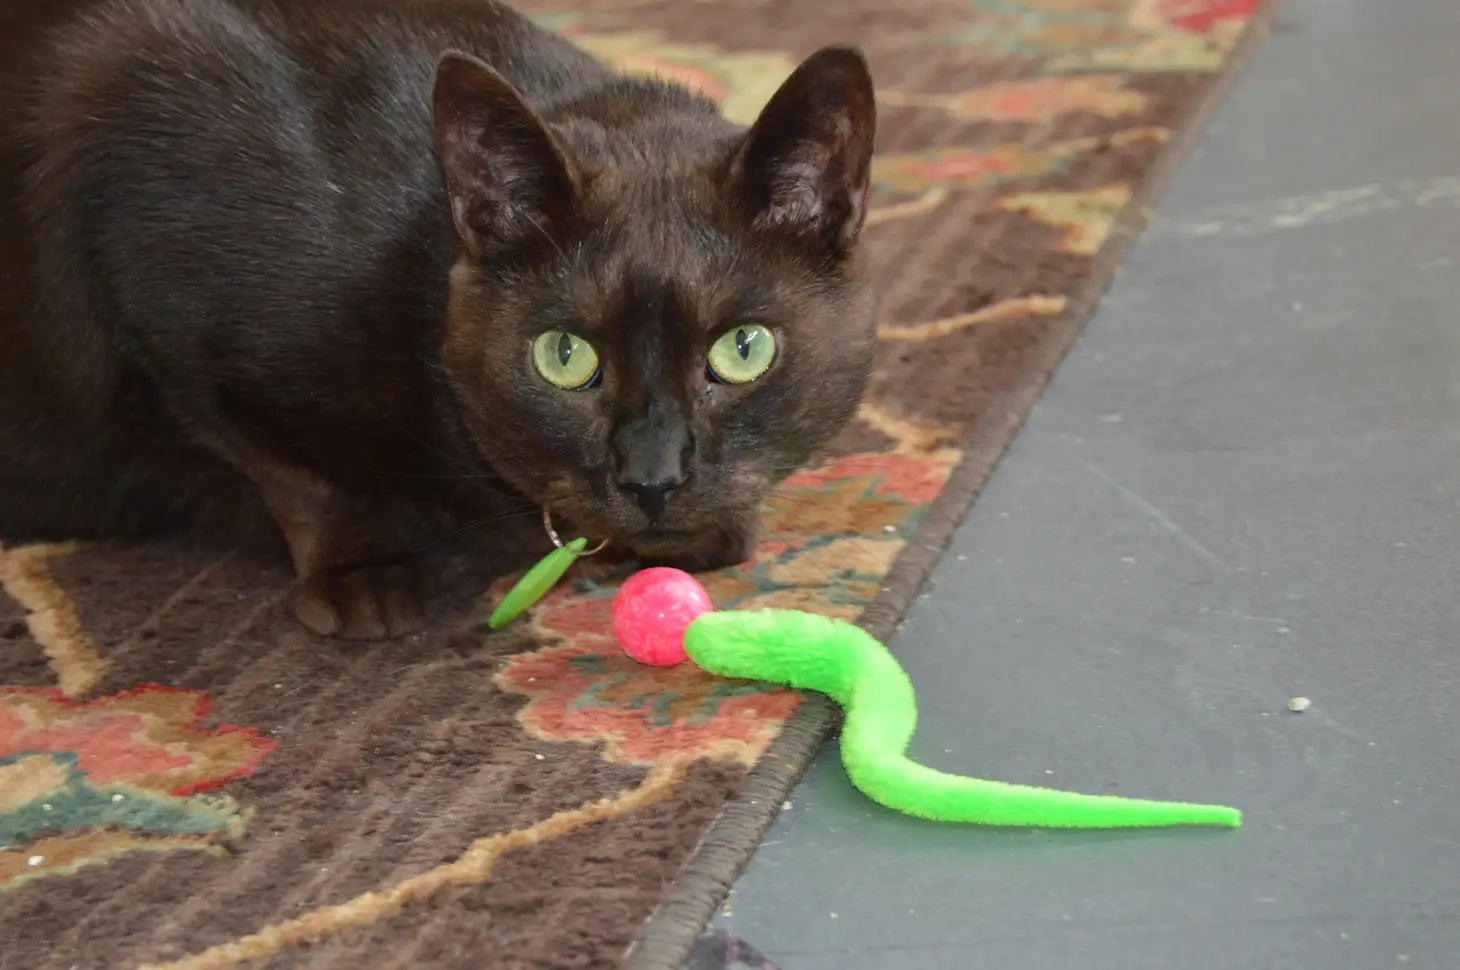 Dezi & Roo - Cat Toy Wiggly Ball